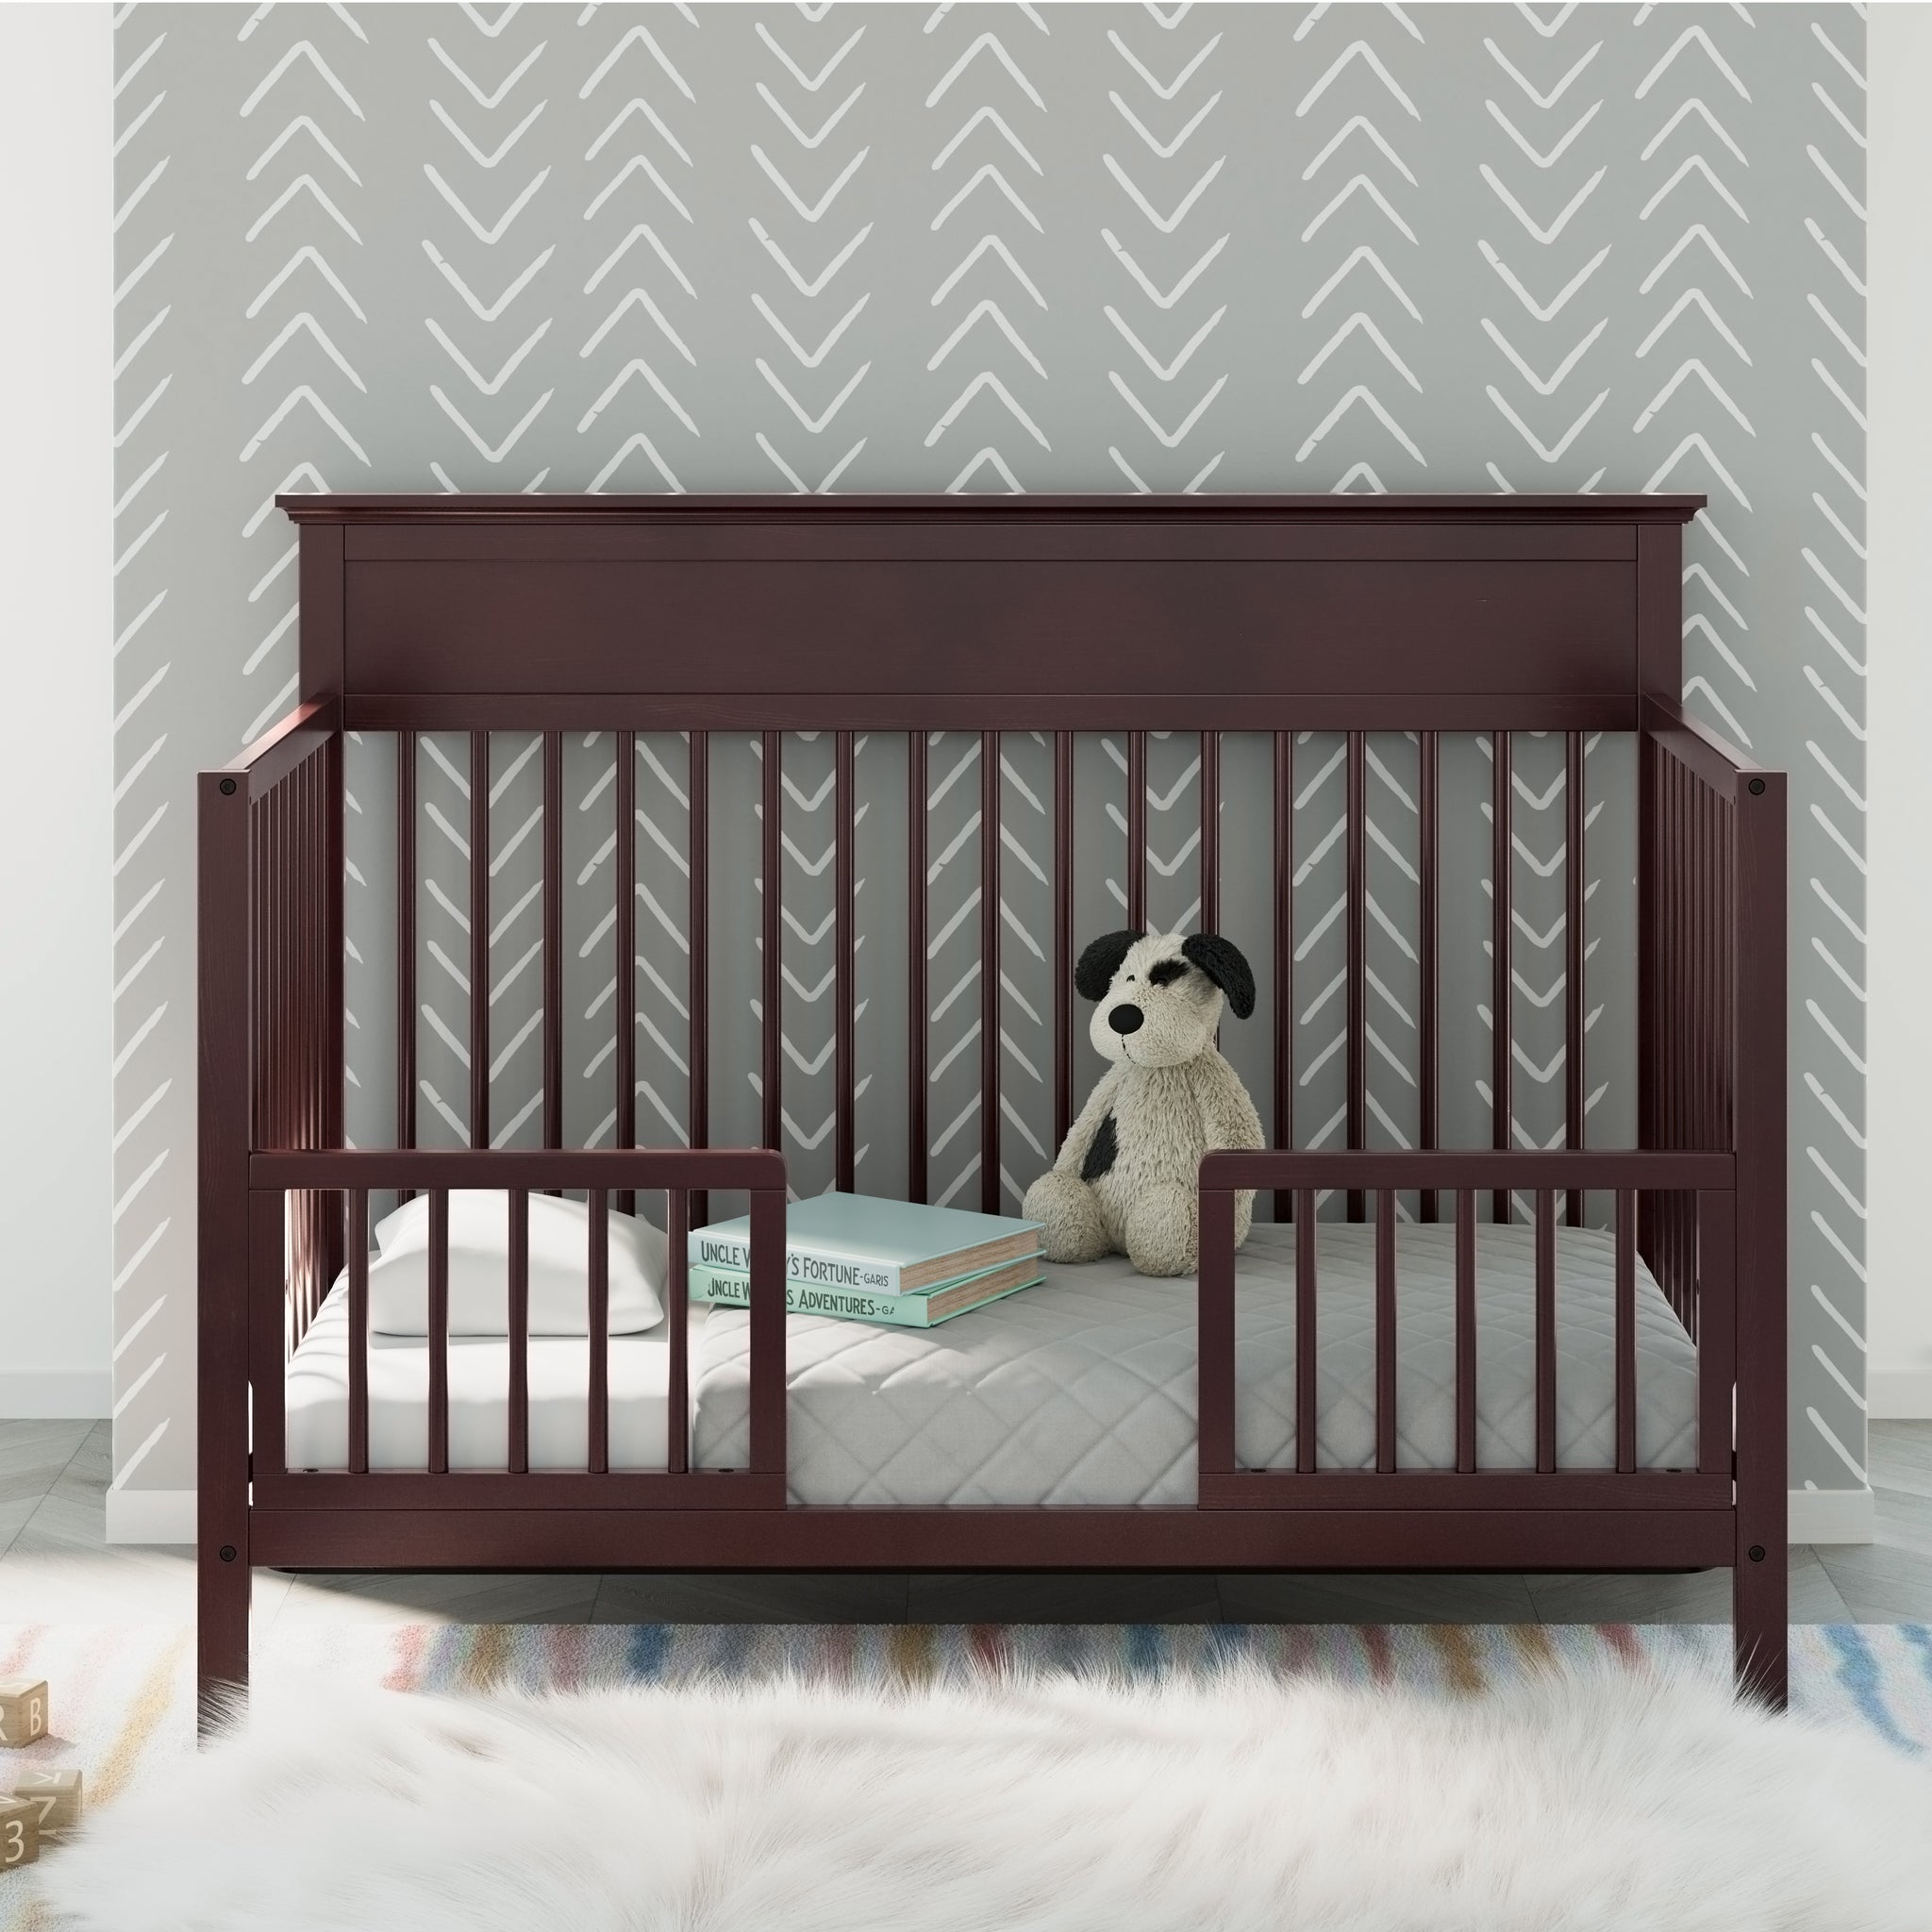 espresso crib in toddler bed conversion with guardrails, in nursery